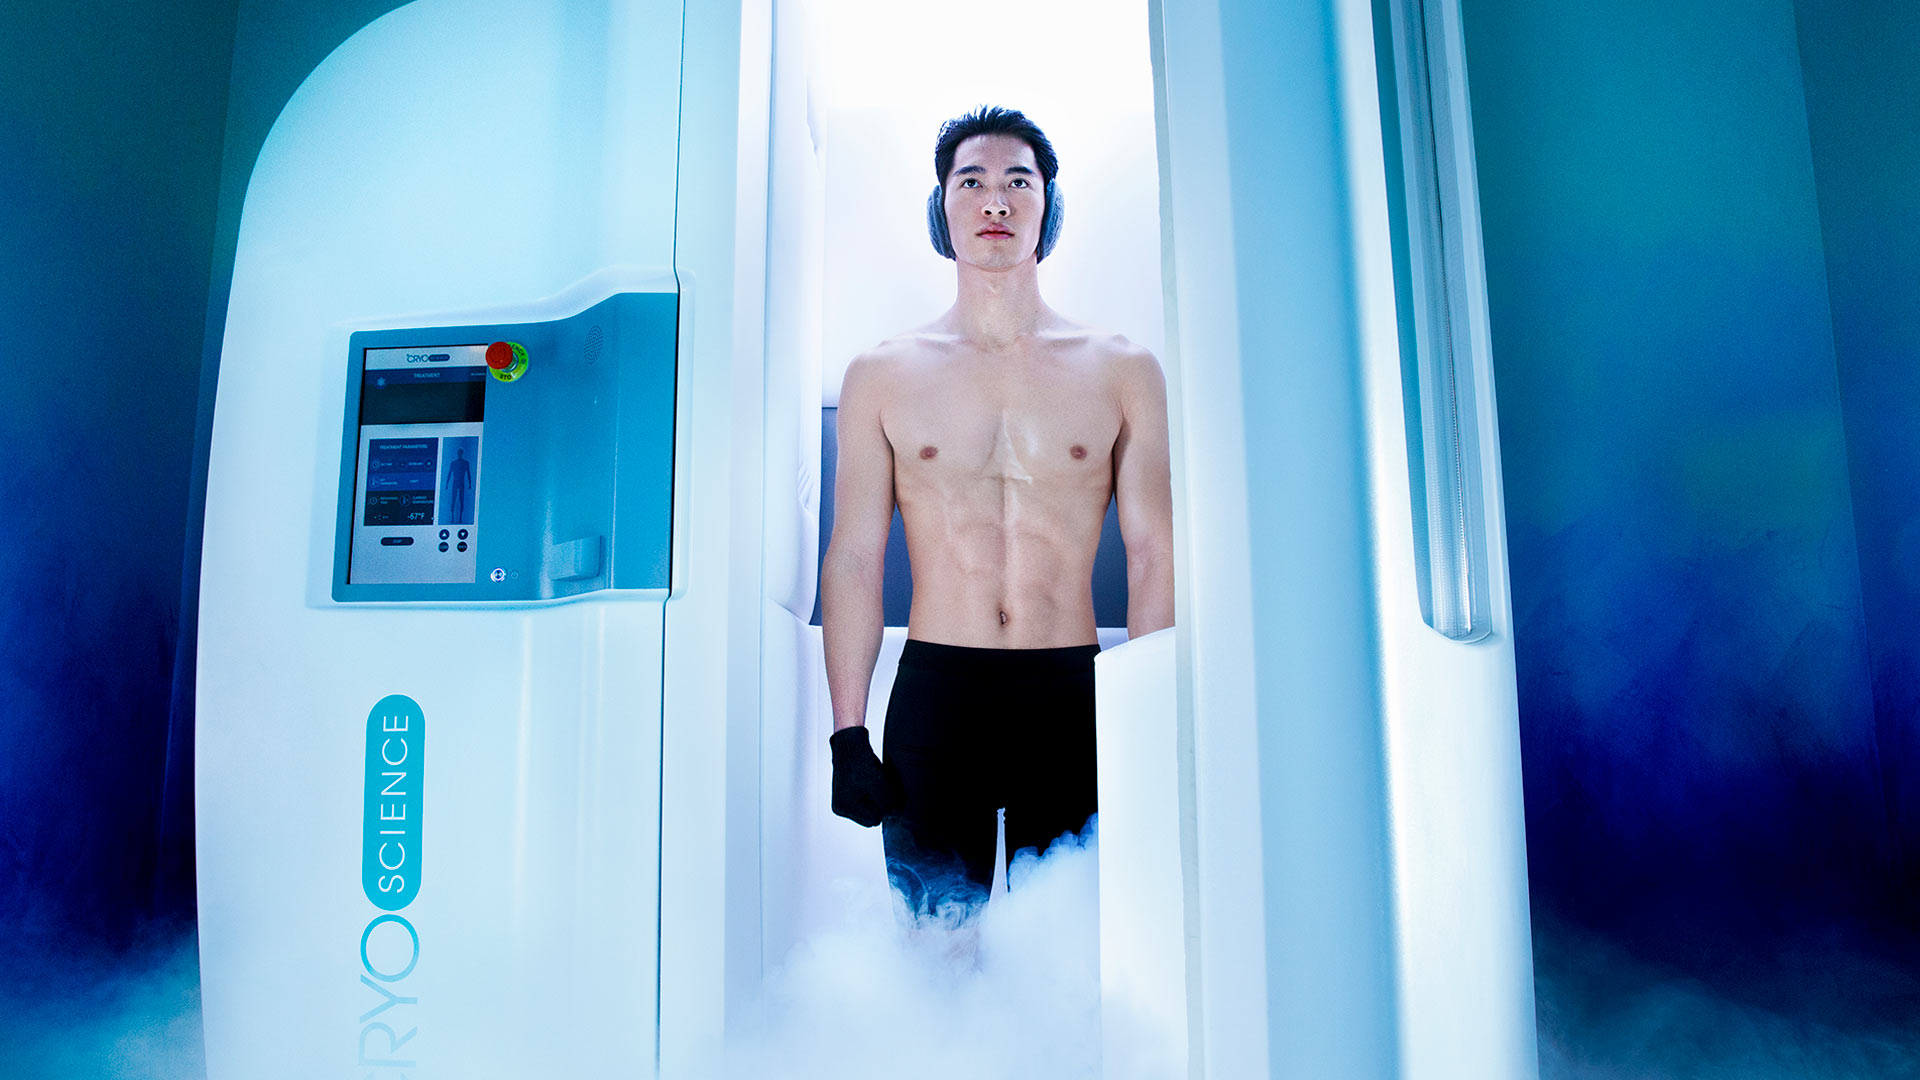 a shirtless man is walking out of a white chamber. The lighting is blue and there is steam coming out of the chamber